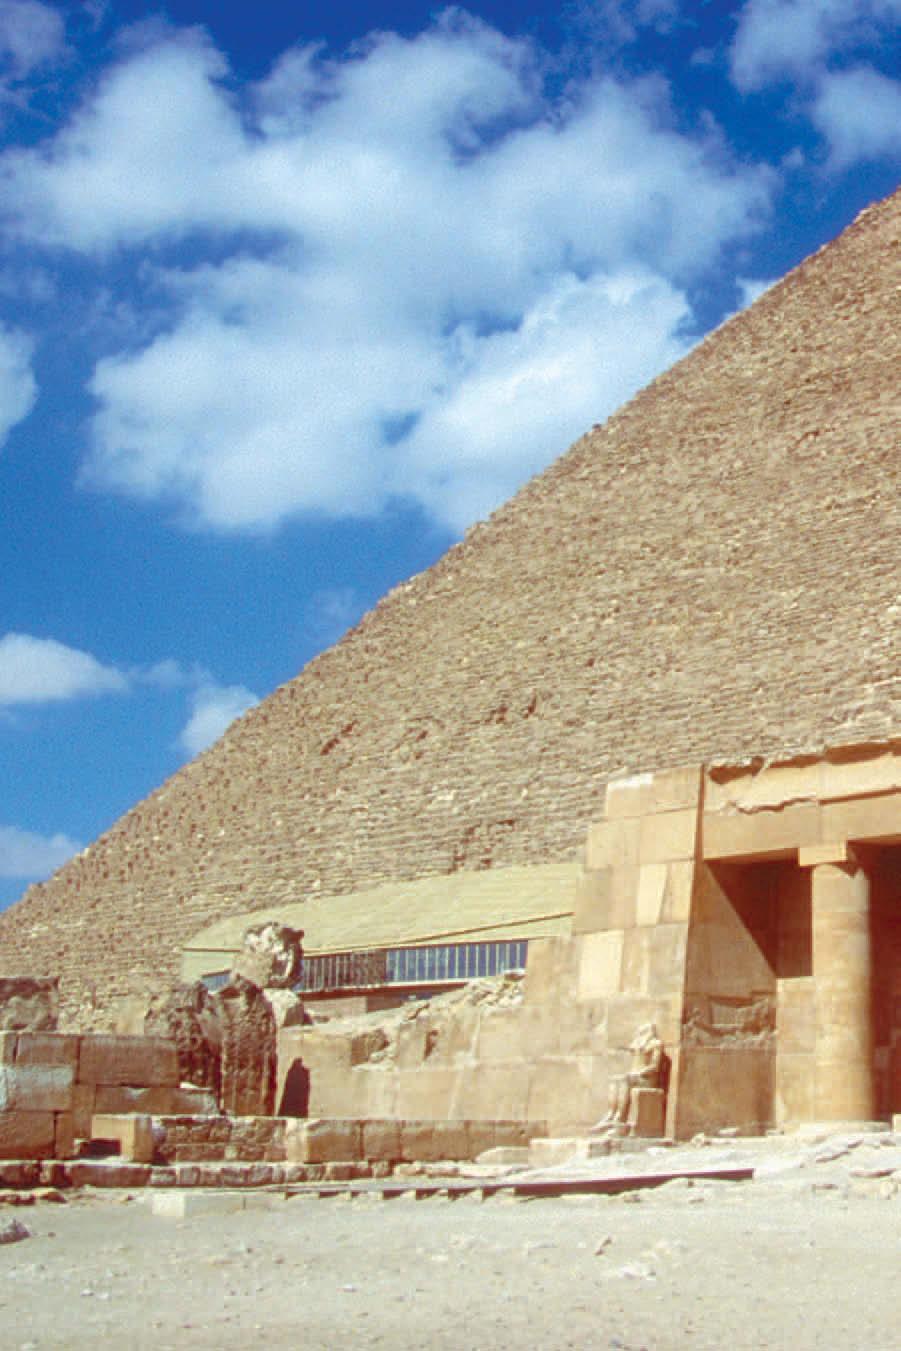 The Great Pyramid was ordered to